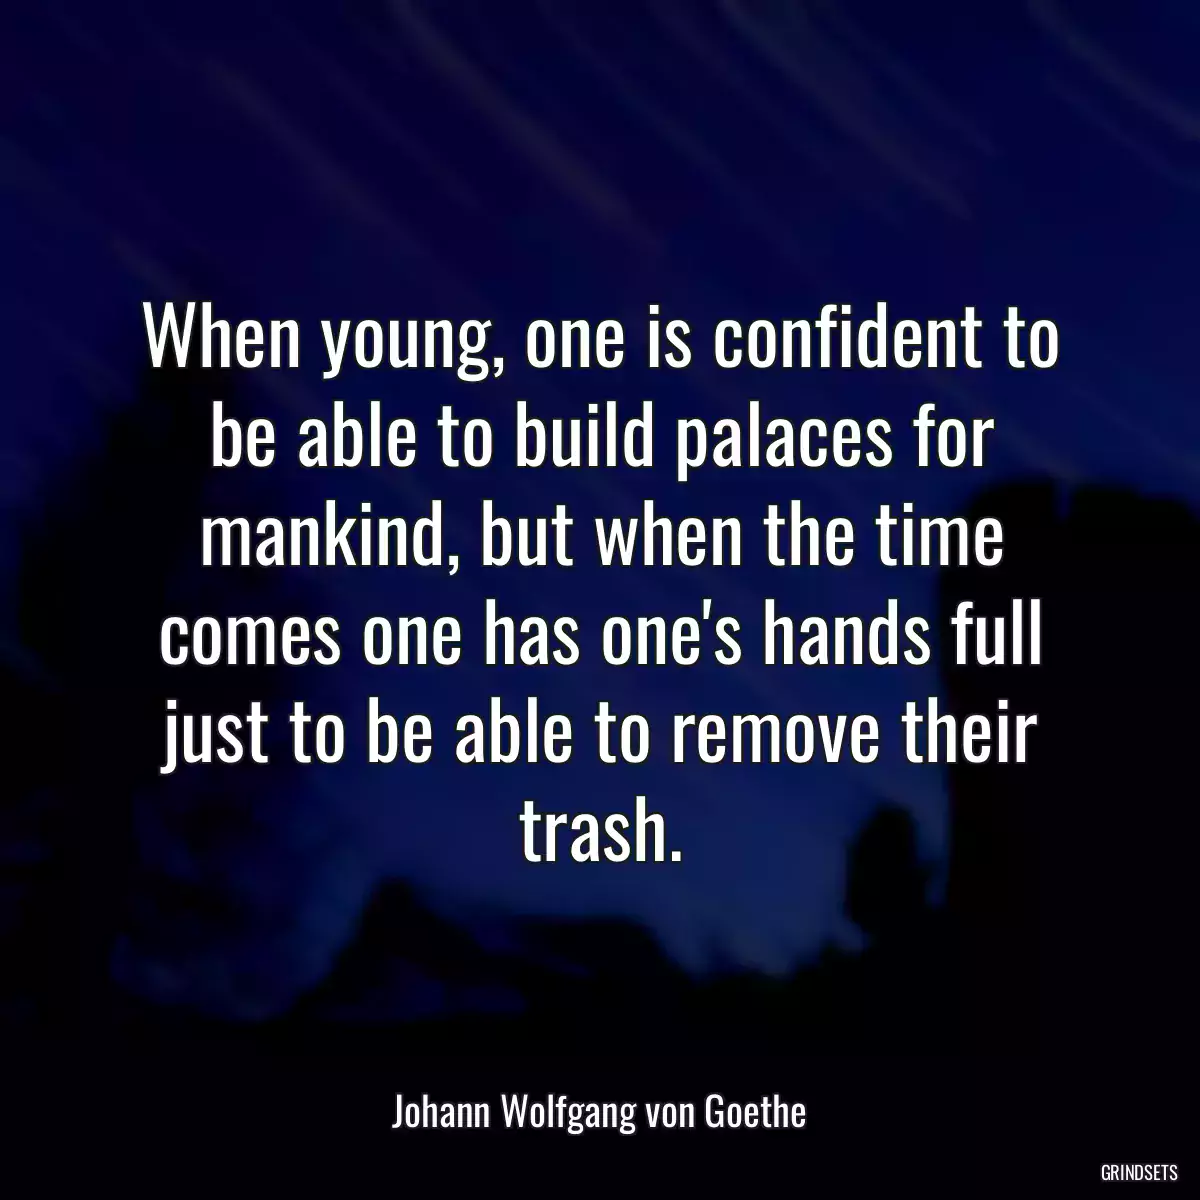 When young, one is confident to be able to build palaces for mankind, but when the time comes one has one\'s hands full just to be able to remove their trash.